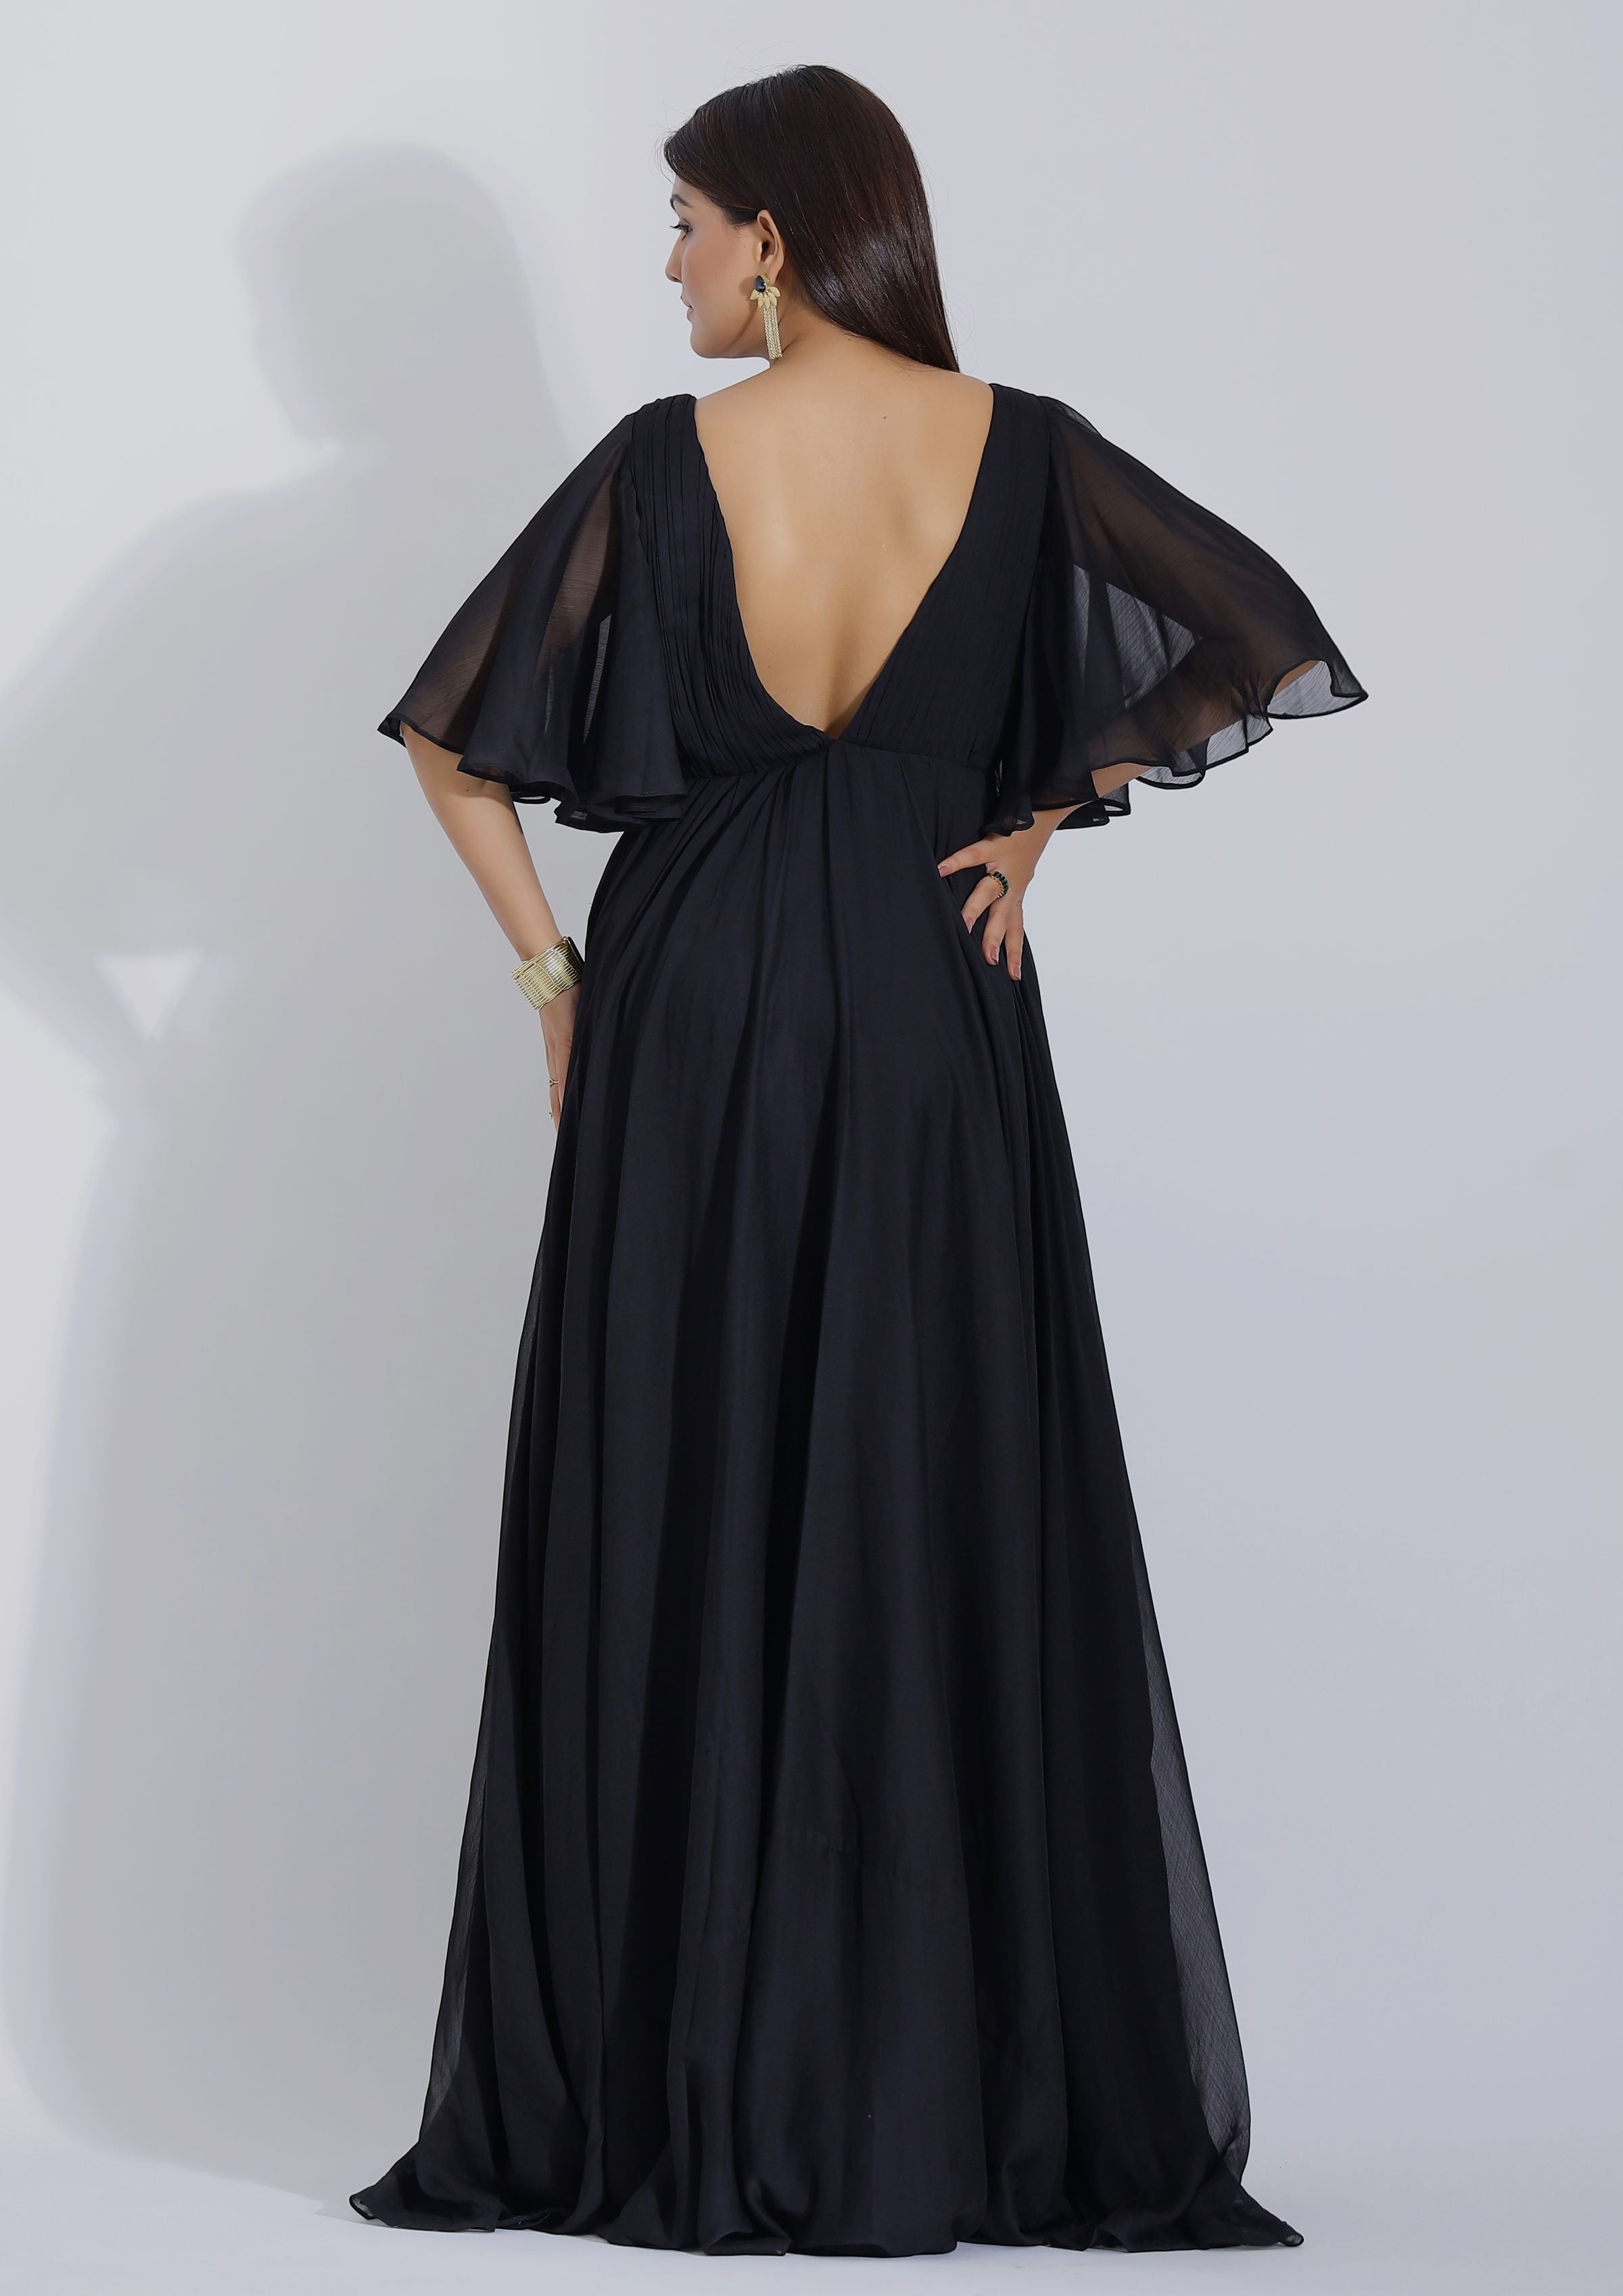 Black Evening Gown back